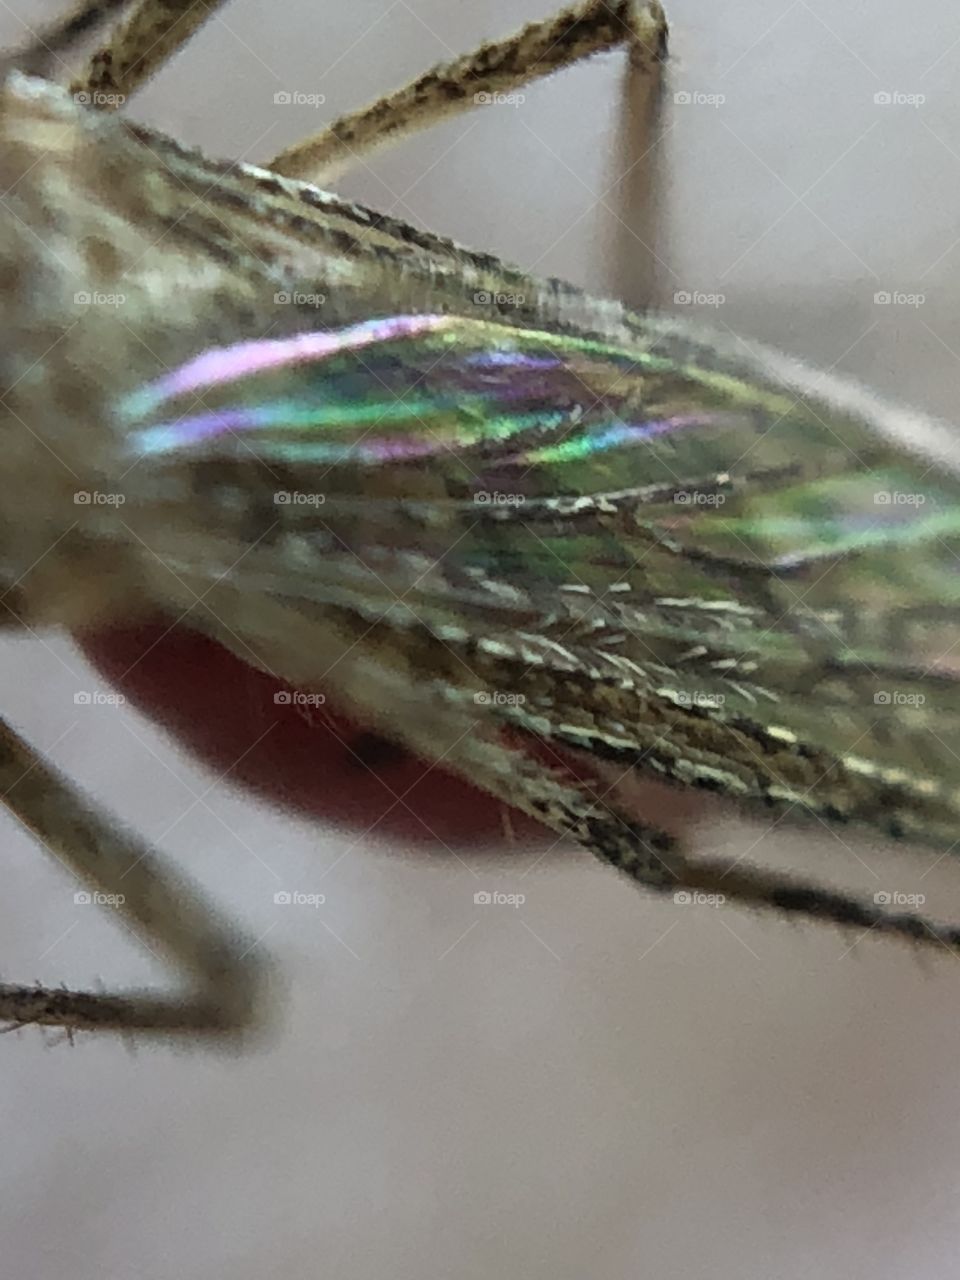 Iridescent beautiful wings of a mosquito - macro photography 